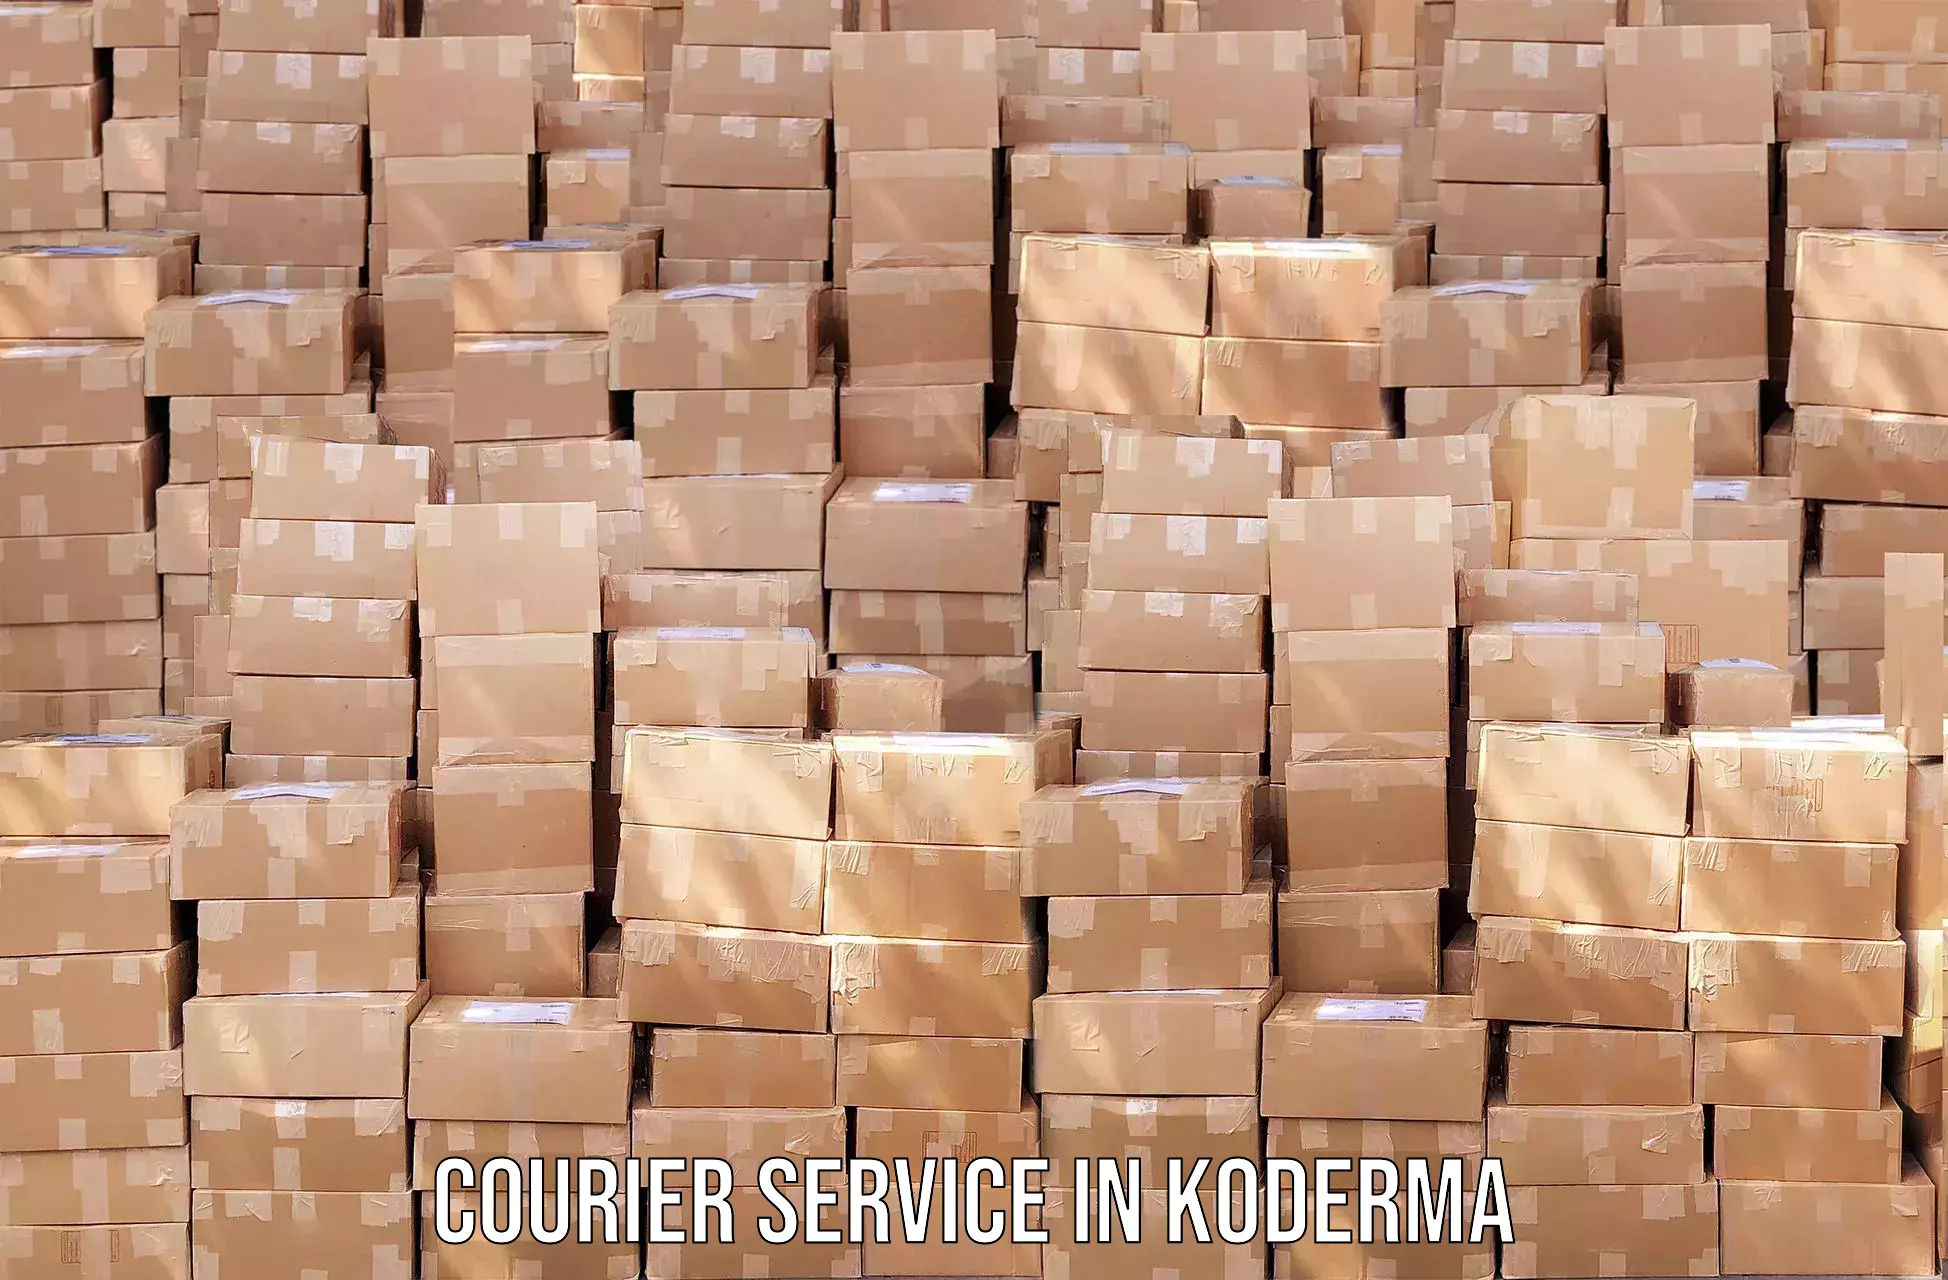 Express delivery capabilities in Koderma